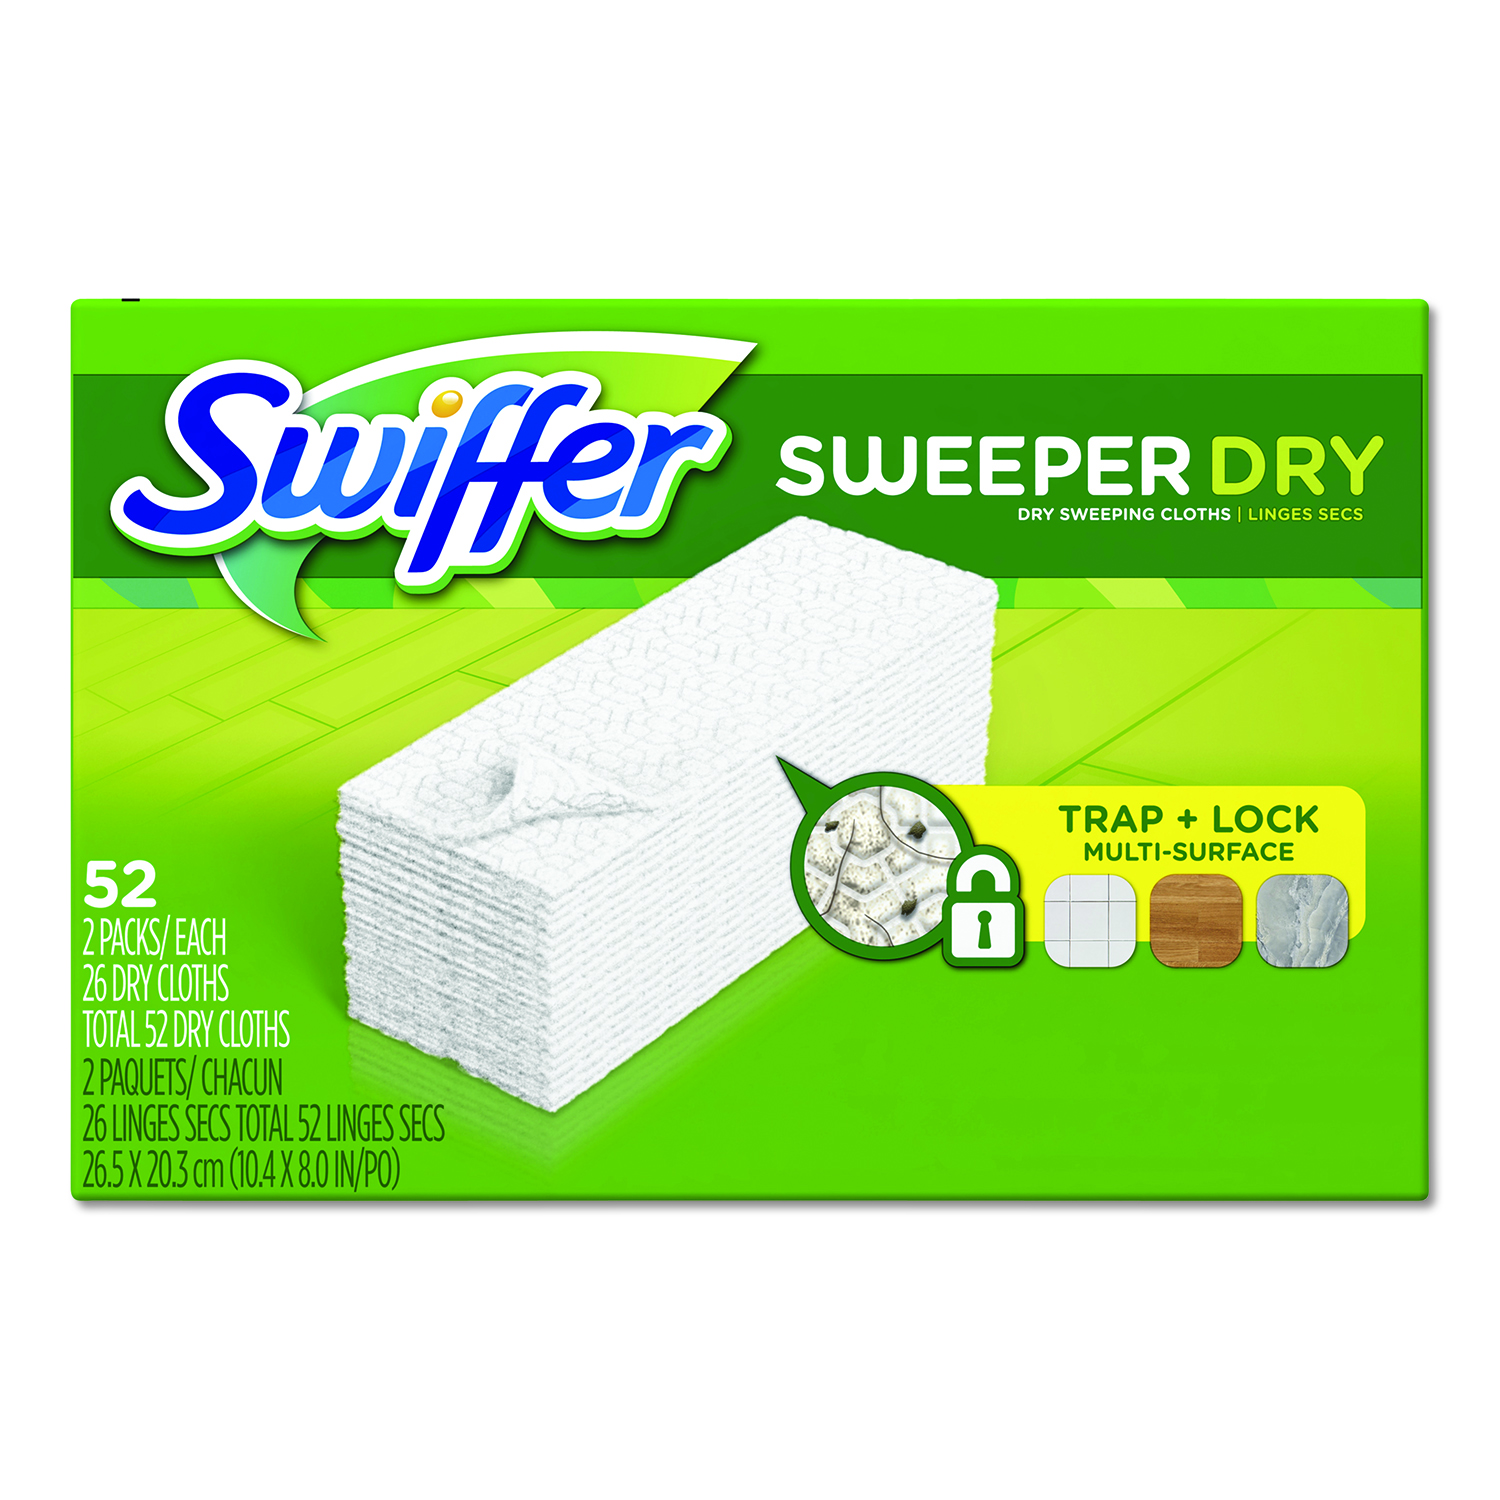 Them Swiffer Wet Jet Refills are super expensive, why buy refills when you  can refill yourself for cheaper! : r/Frugal